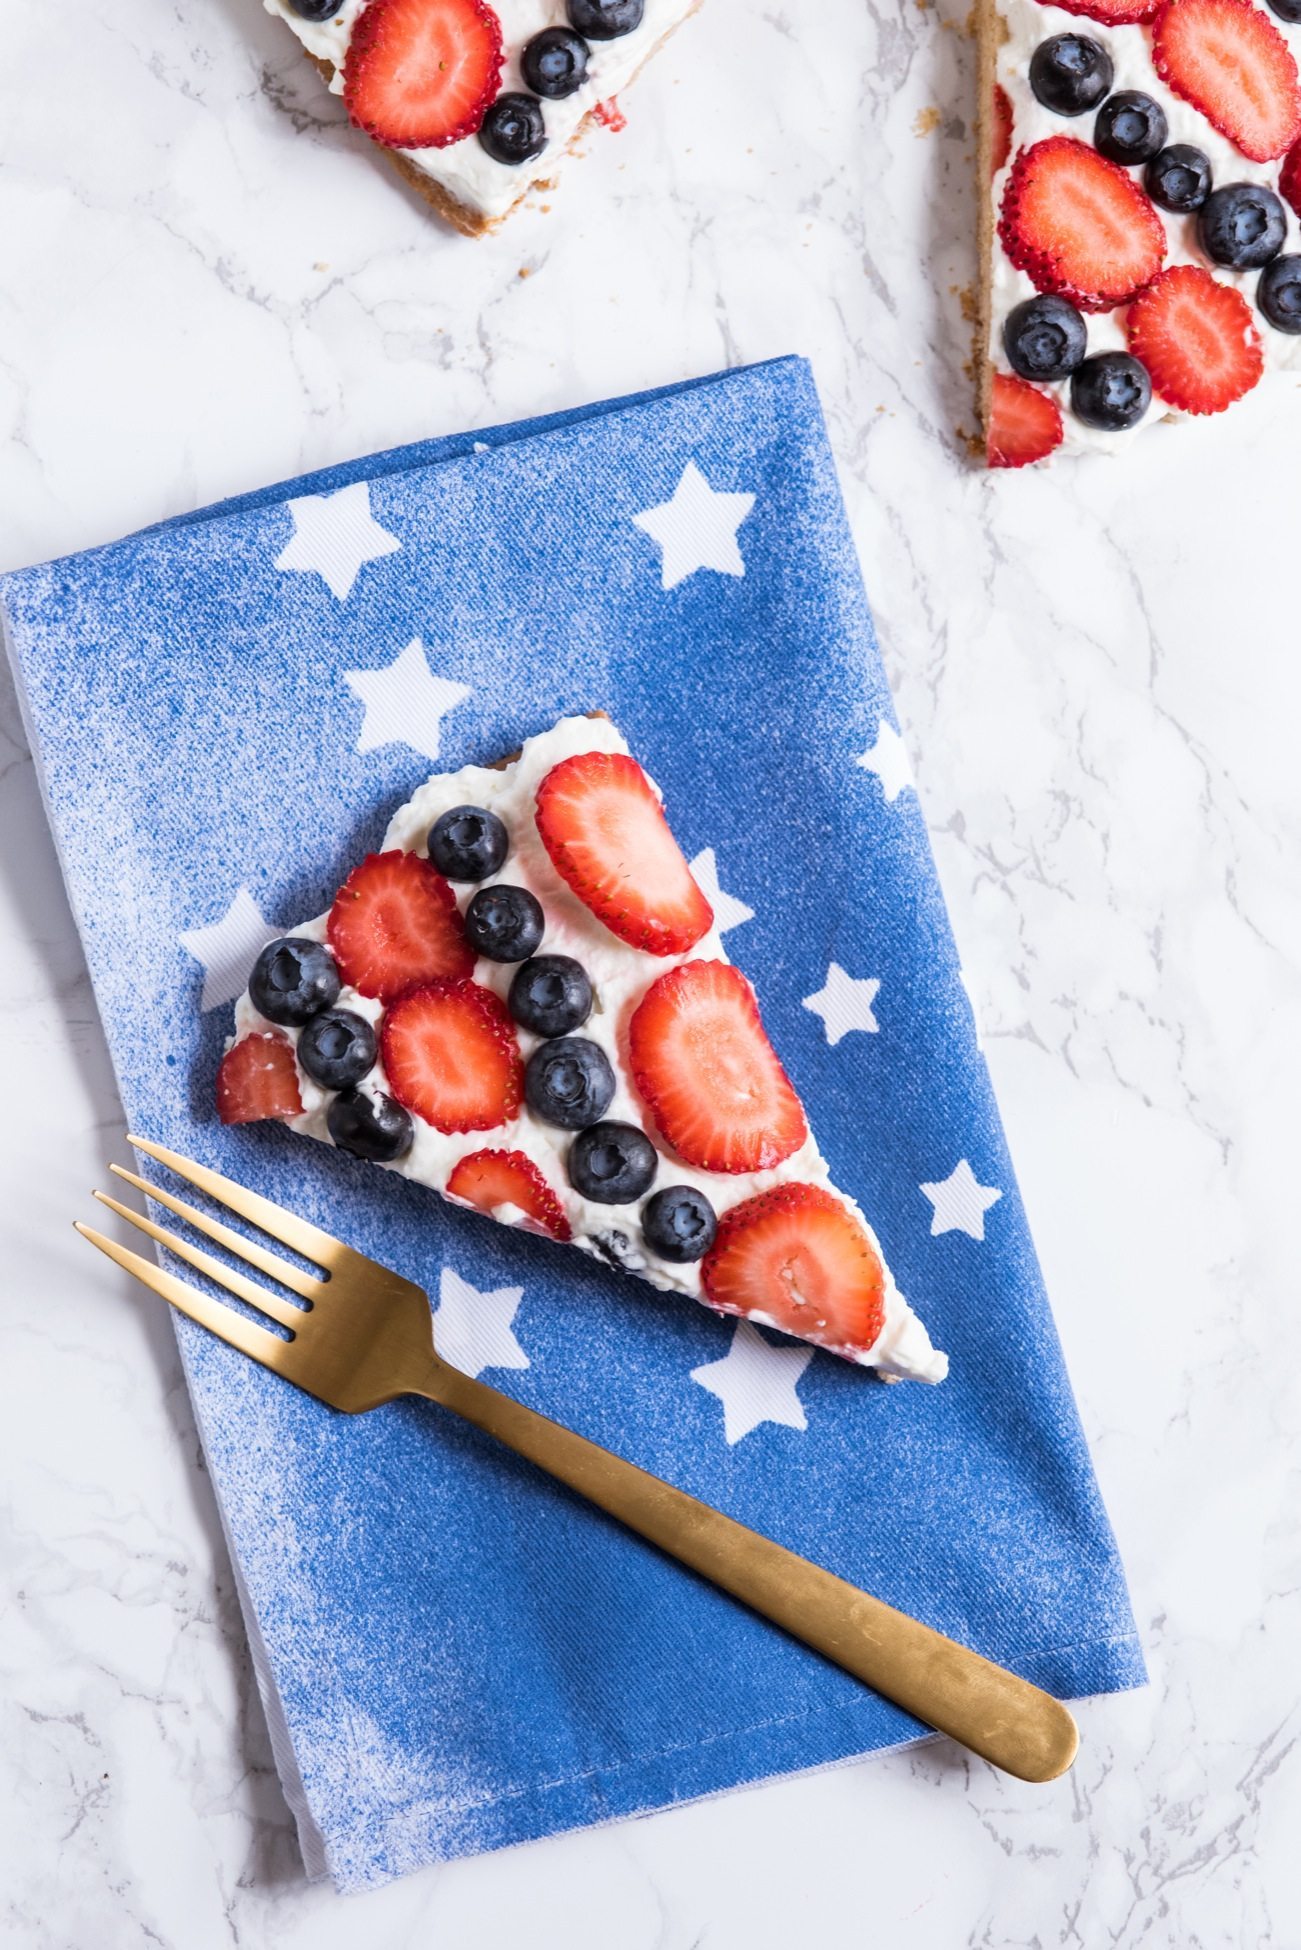 DIY Star Spangled Napkins | 4th of July craft ideas, 4th of July recipes, entertaining tips and party ideas from @cydconverse